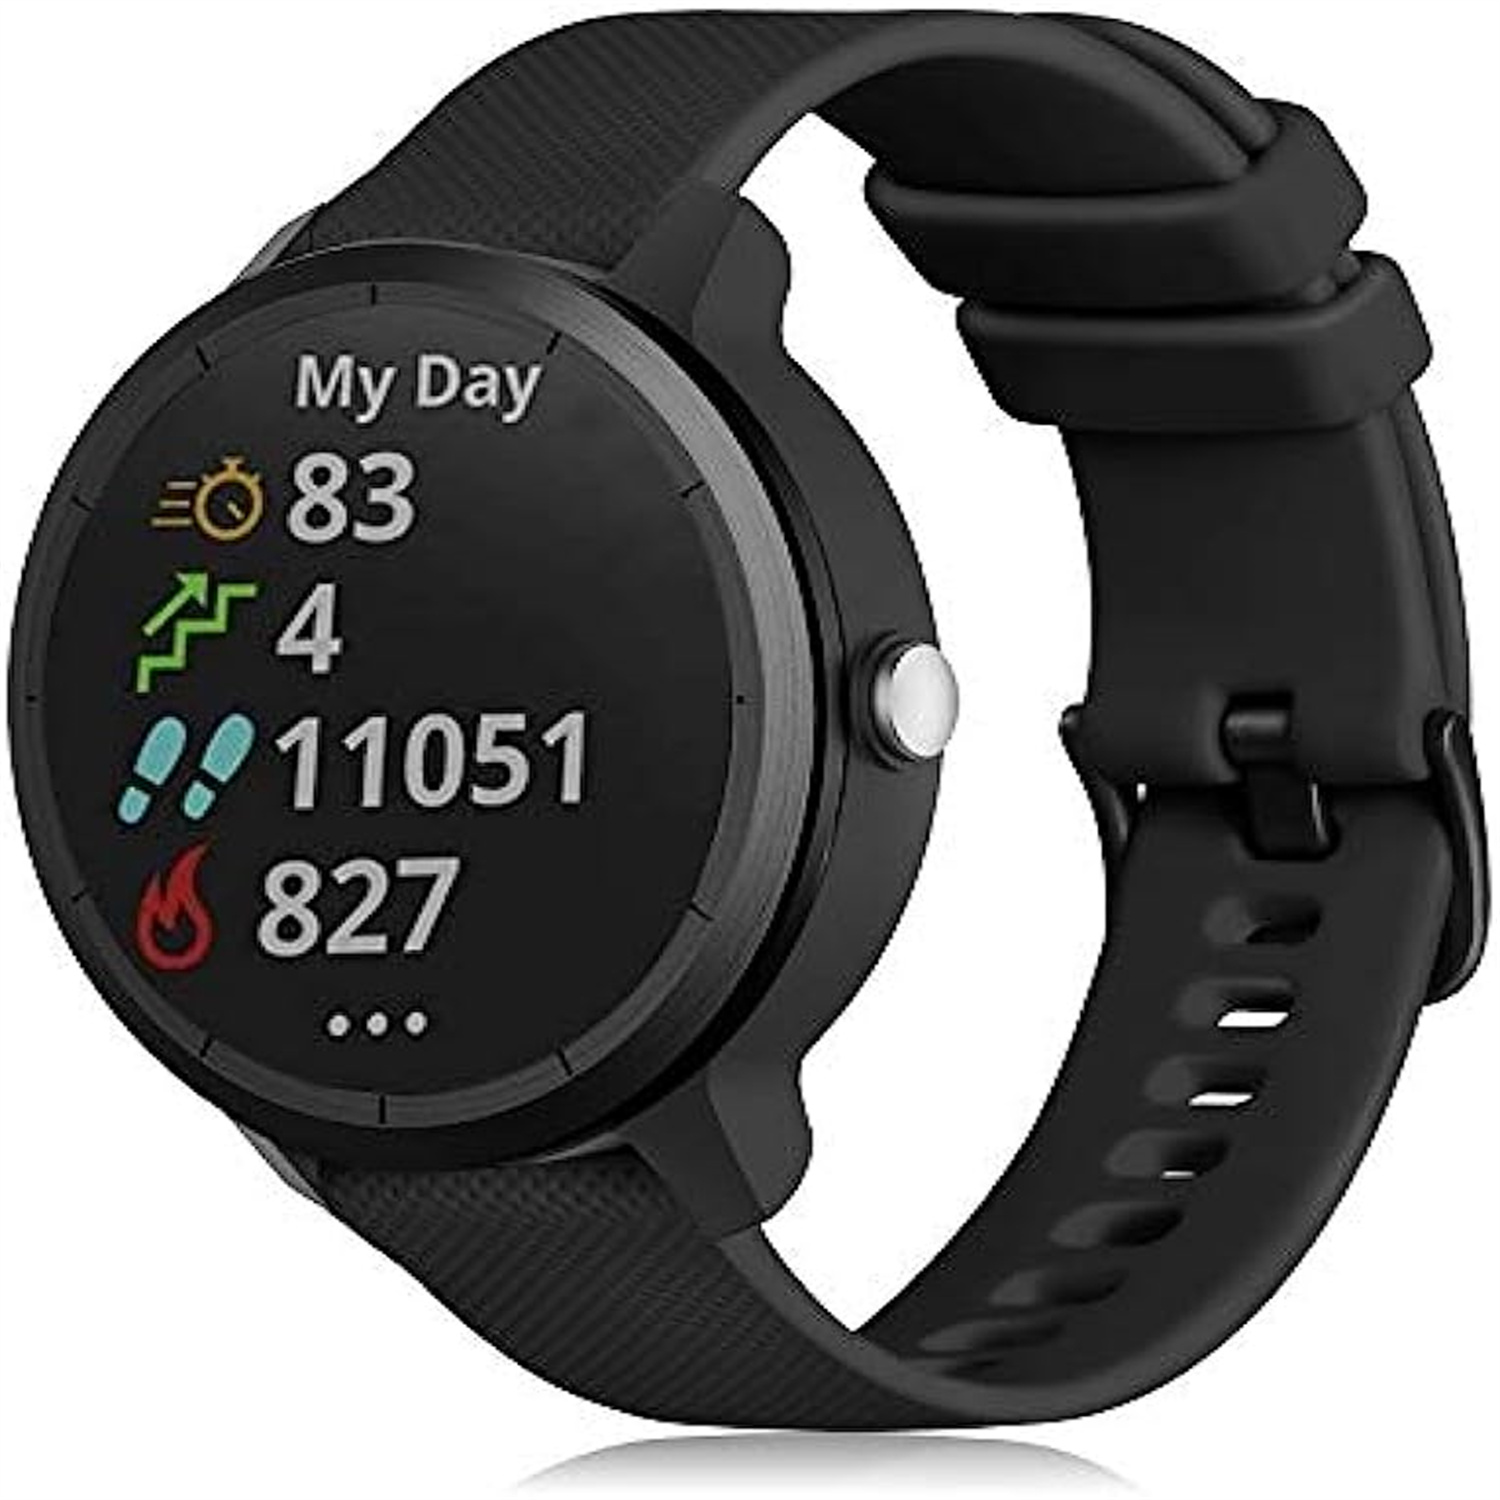 Silicone Leather Watchband For Garmin Vivoactive 4 3 Music Watch